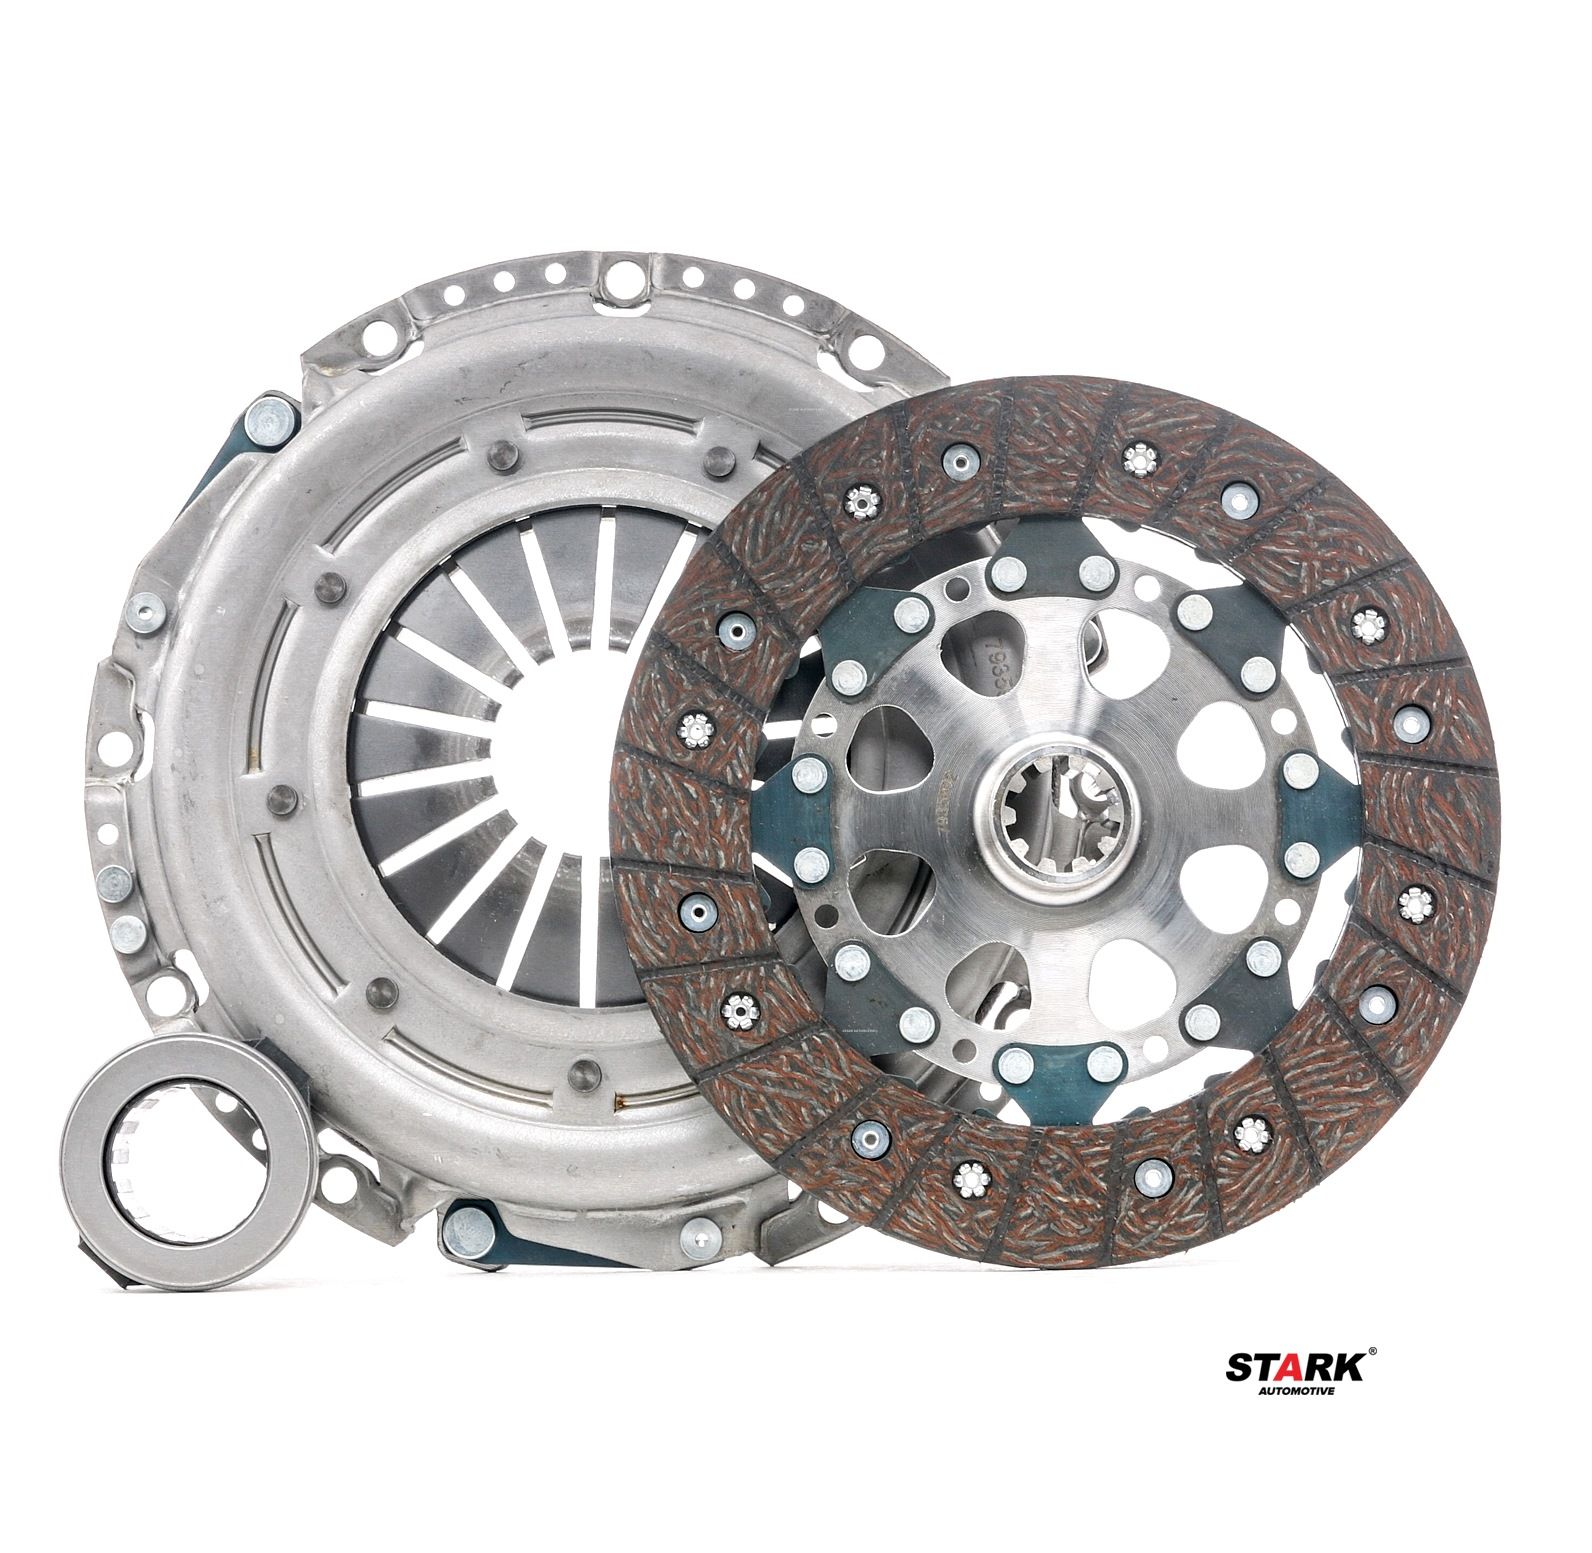 SKCK-0100034 STARK Clutch set BMW three-piece, with bearing(s), with clutch disc, 228mm